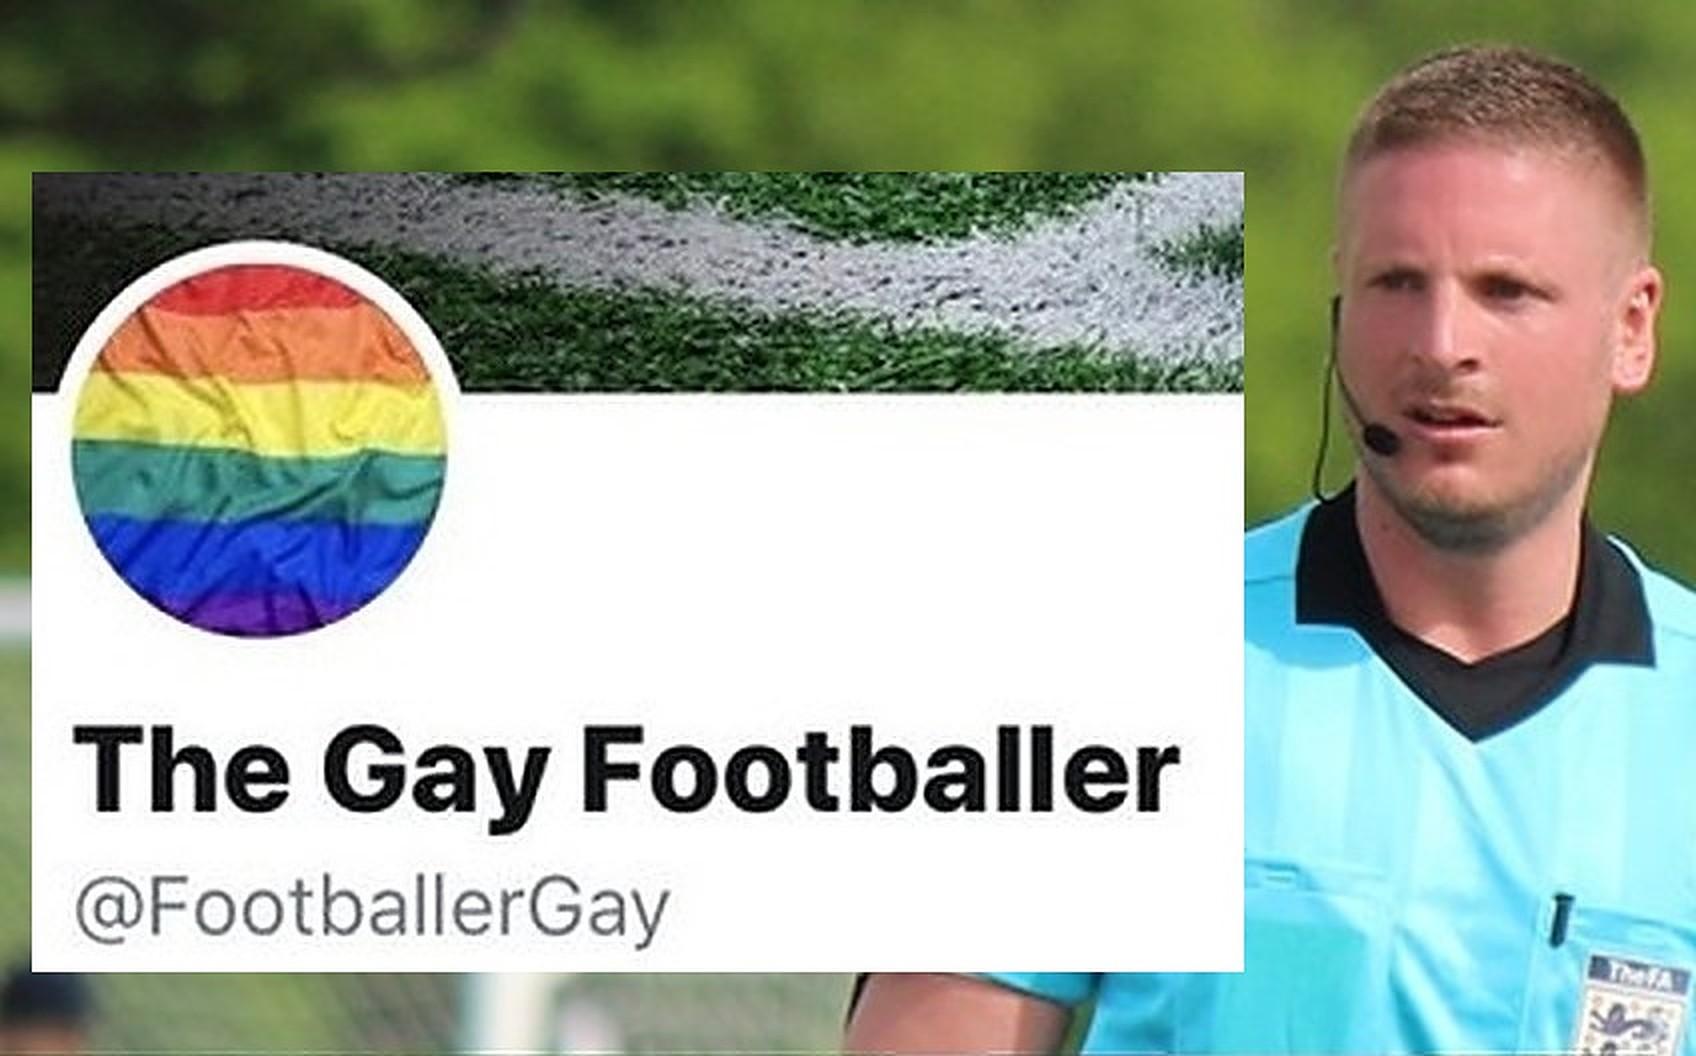 The 'Gay footballer' Twitter account had been due to come out, but disappeared from Twitter